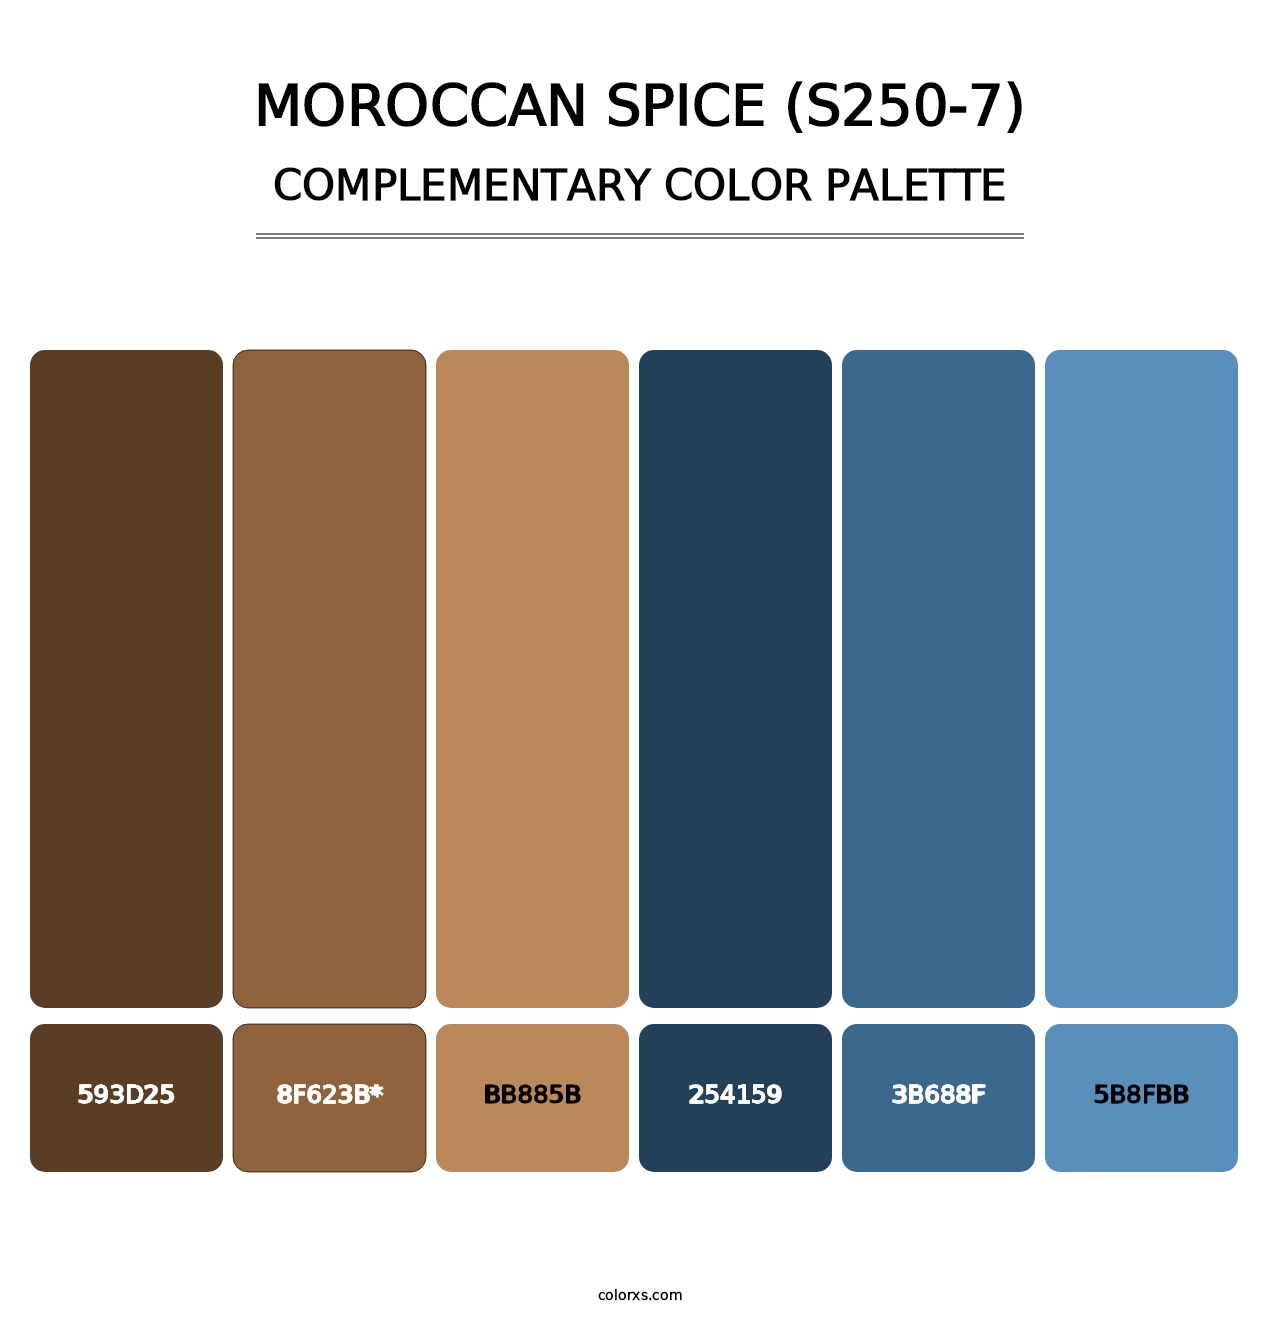 Moroccan Spice (S250-7) - Complementary Color Palette